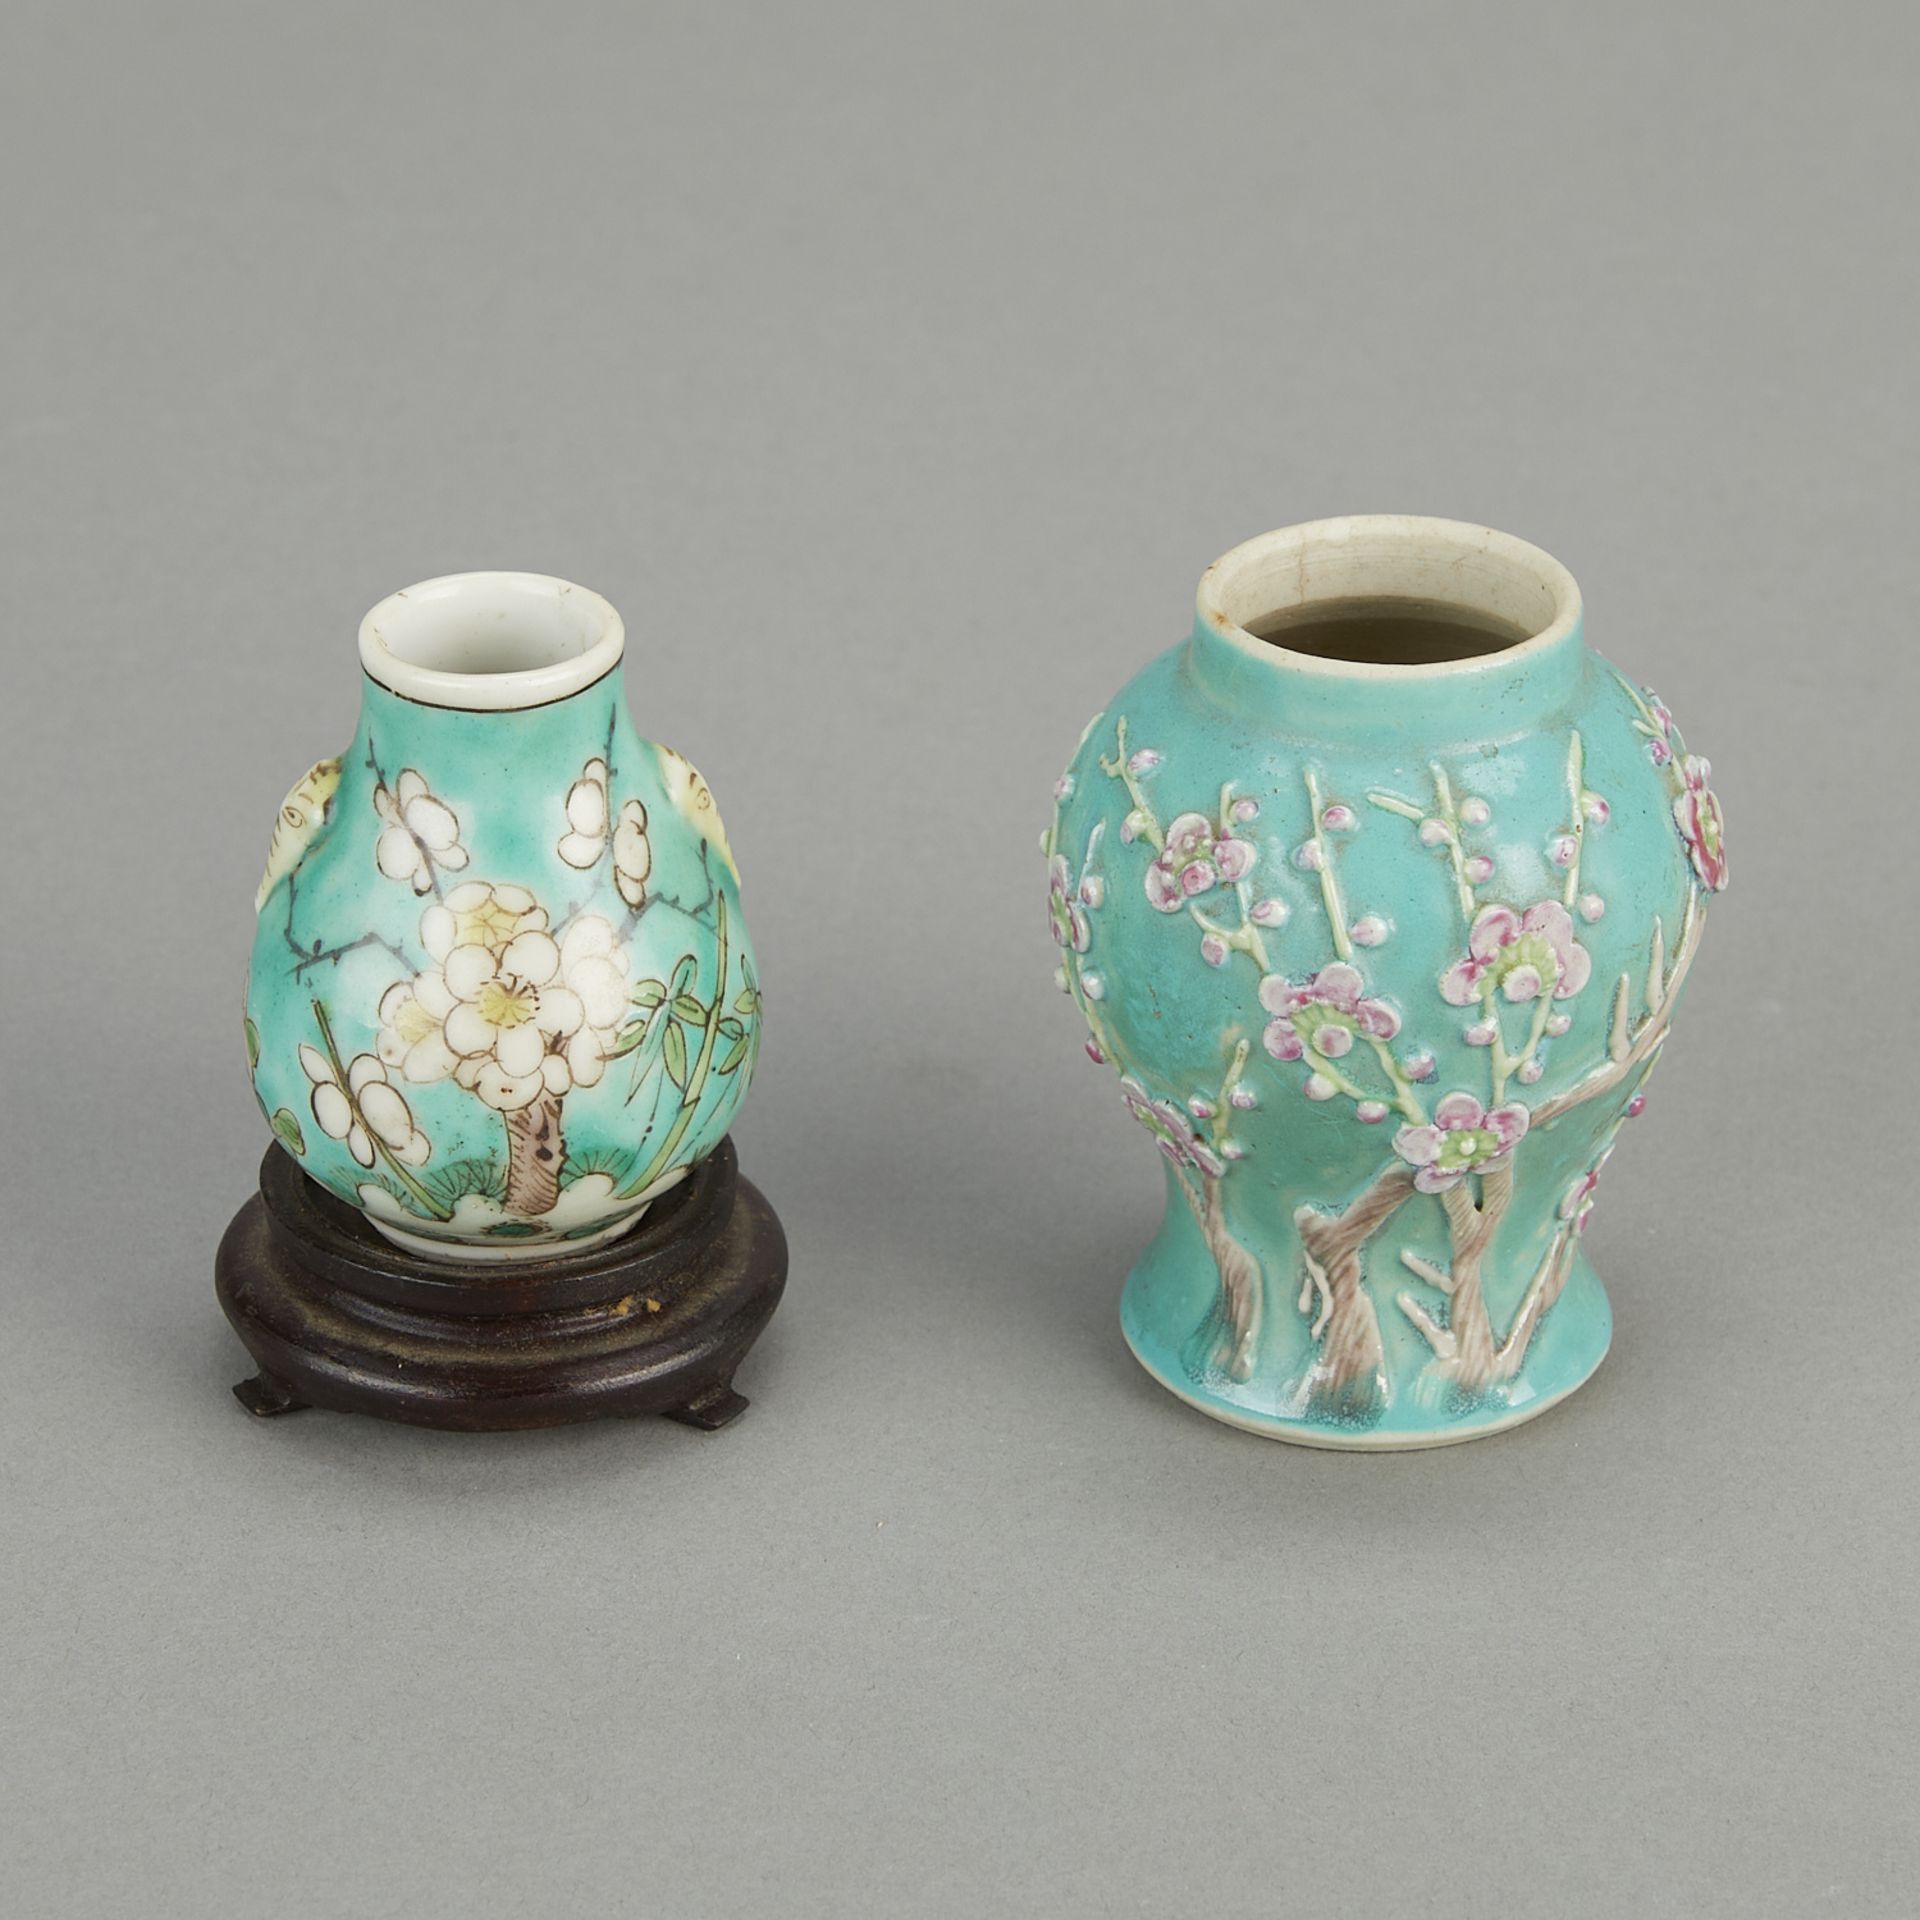 Group of 5 Chinese Porcelain Objects - Image 17 of 21